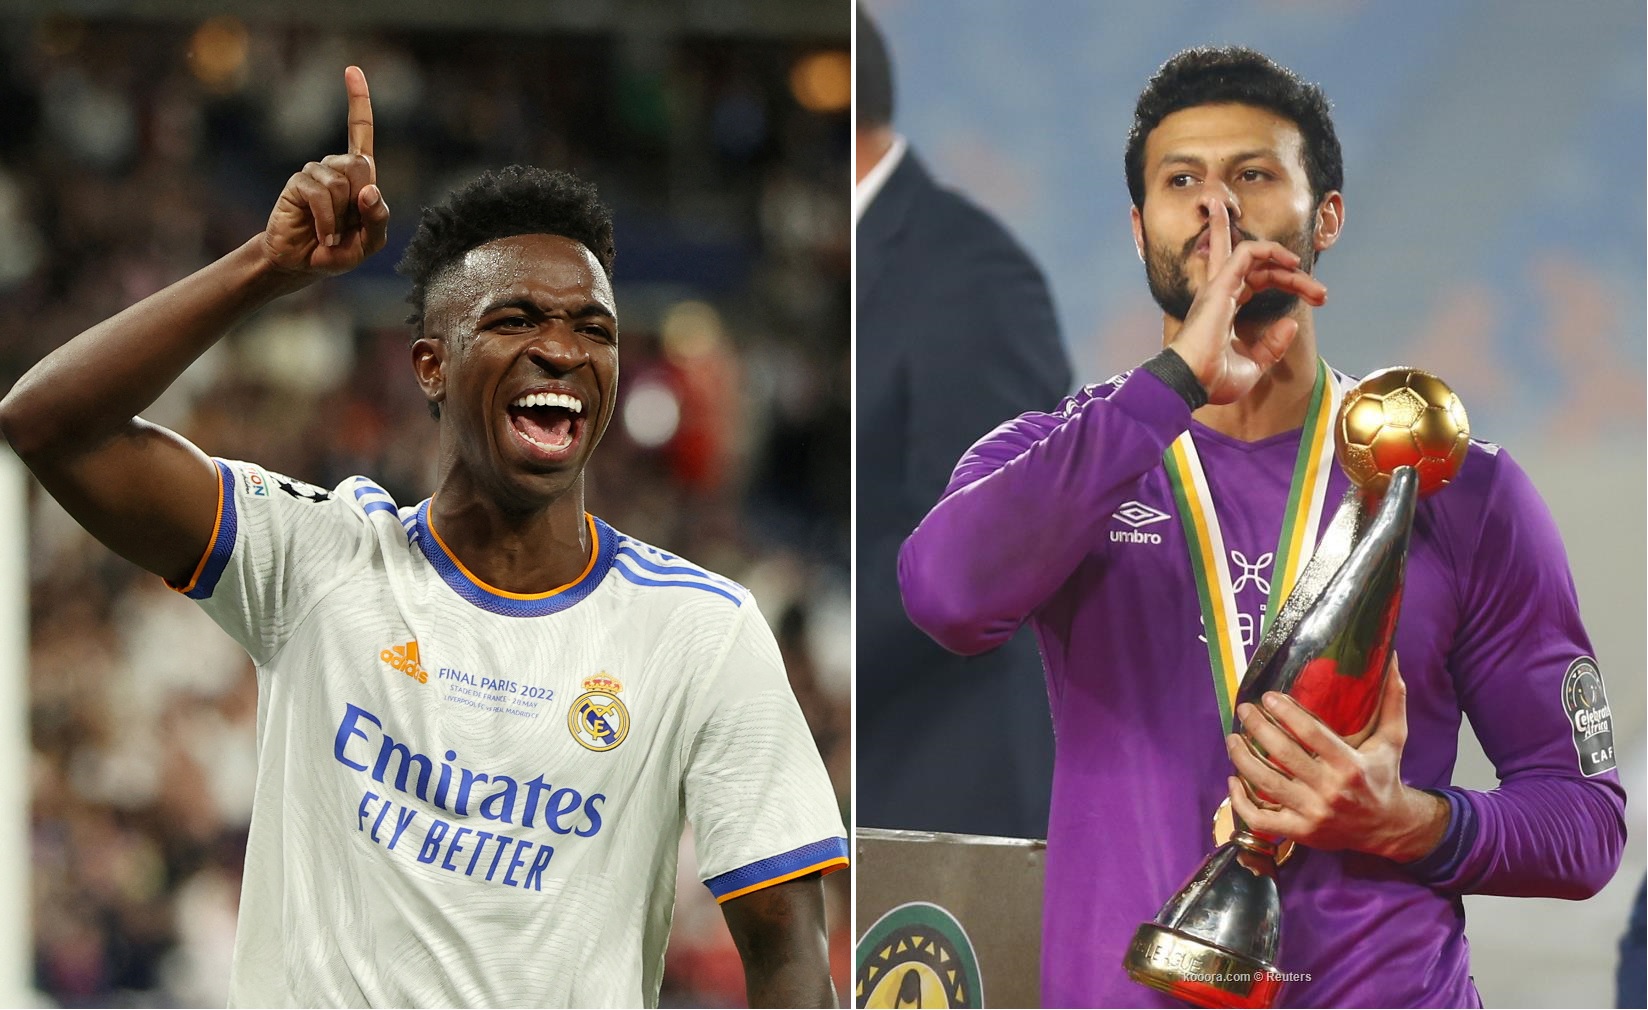 A shocking difference in the market value between Real Madrid’s “jewels” and Al-Ahly players